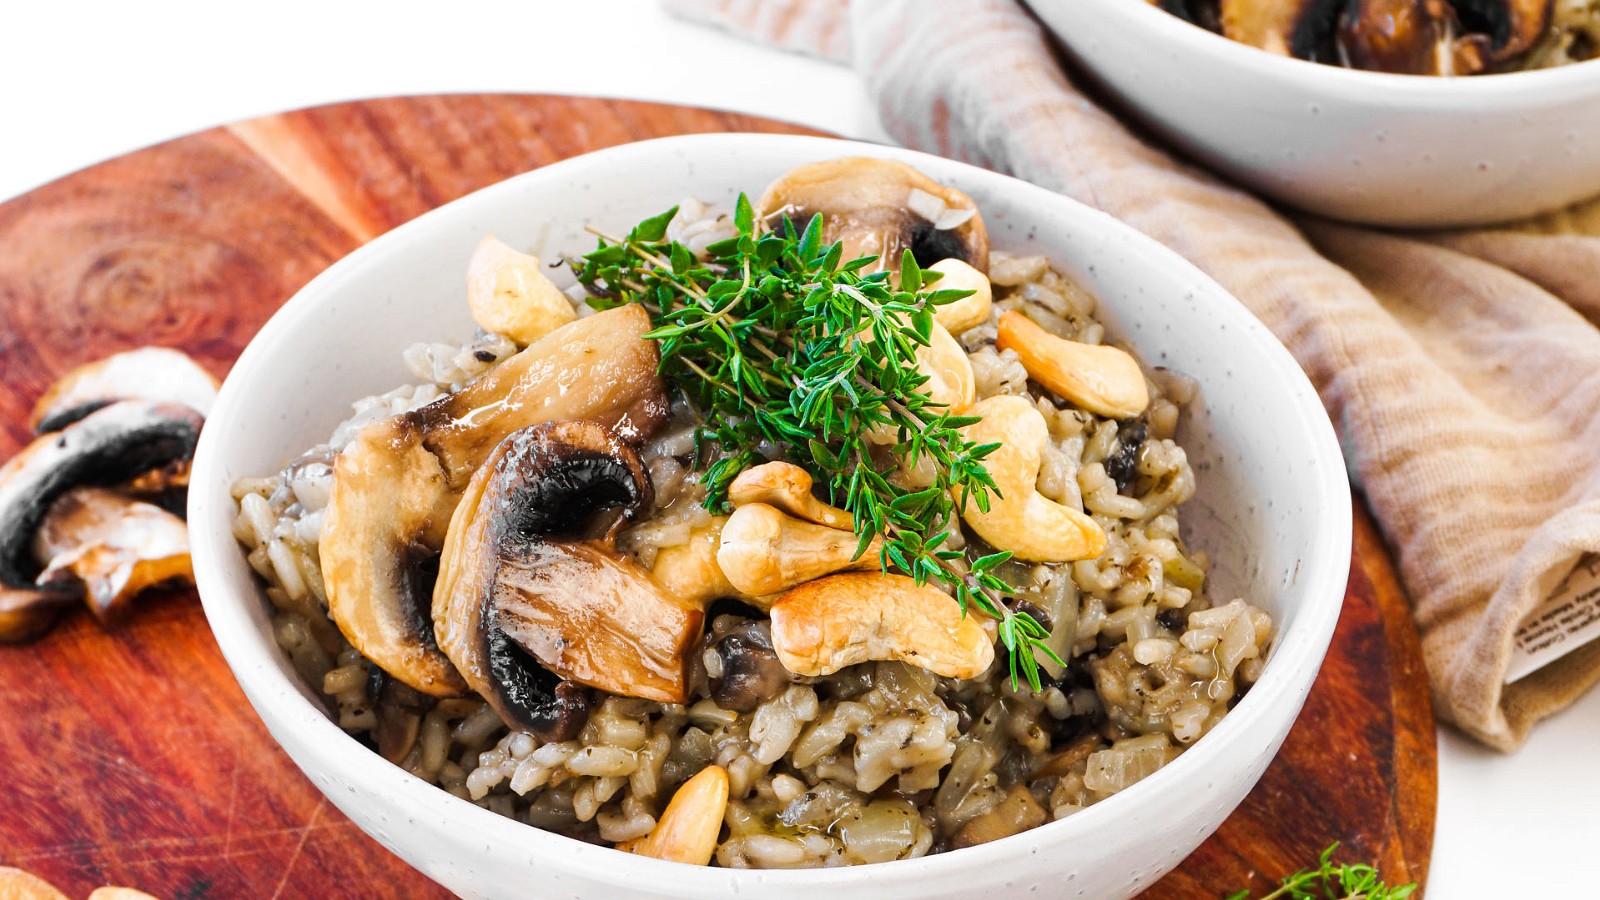 Image of Creamy Mushroom and Cashew Risotto